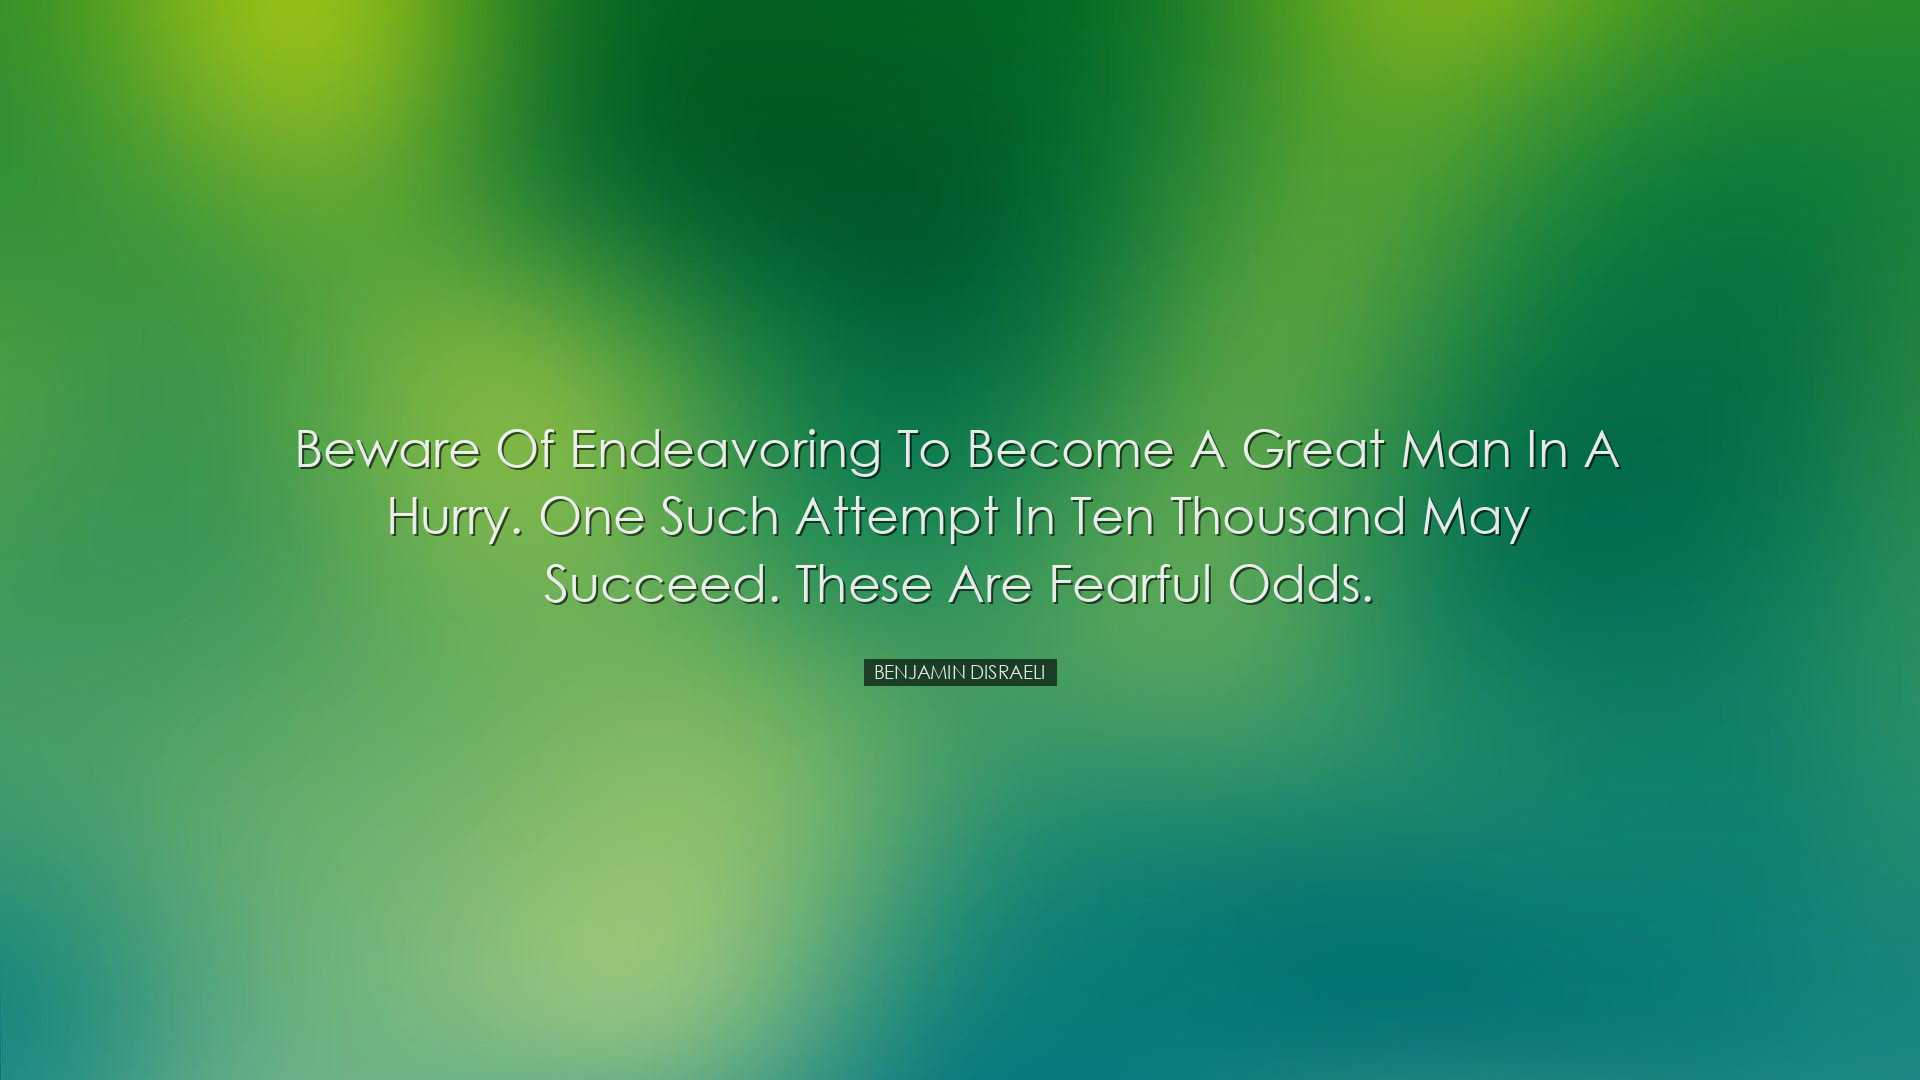 Beware of endeavoring to become a great man in a hurry. One such a